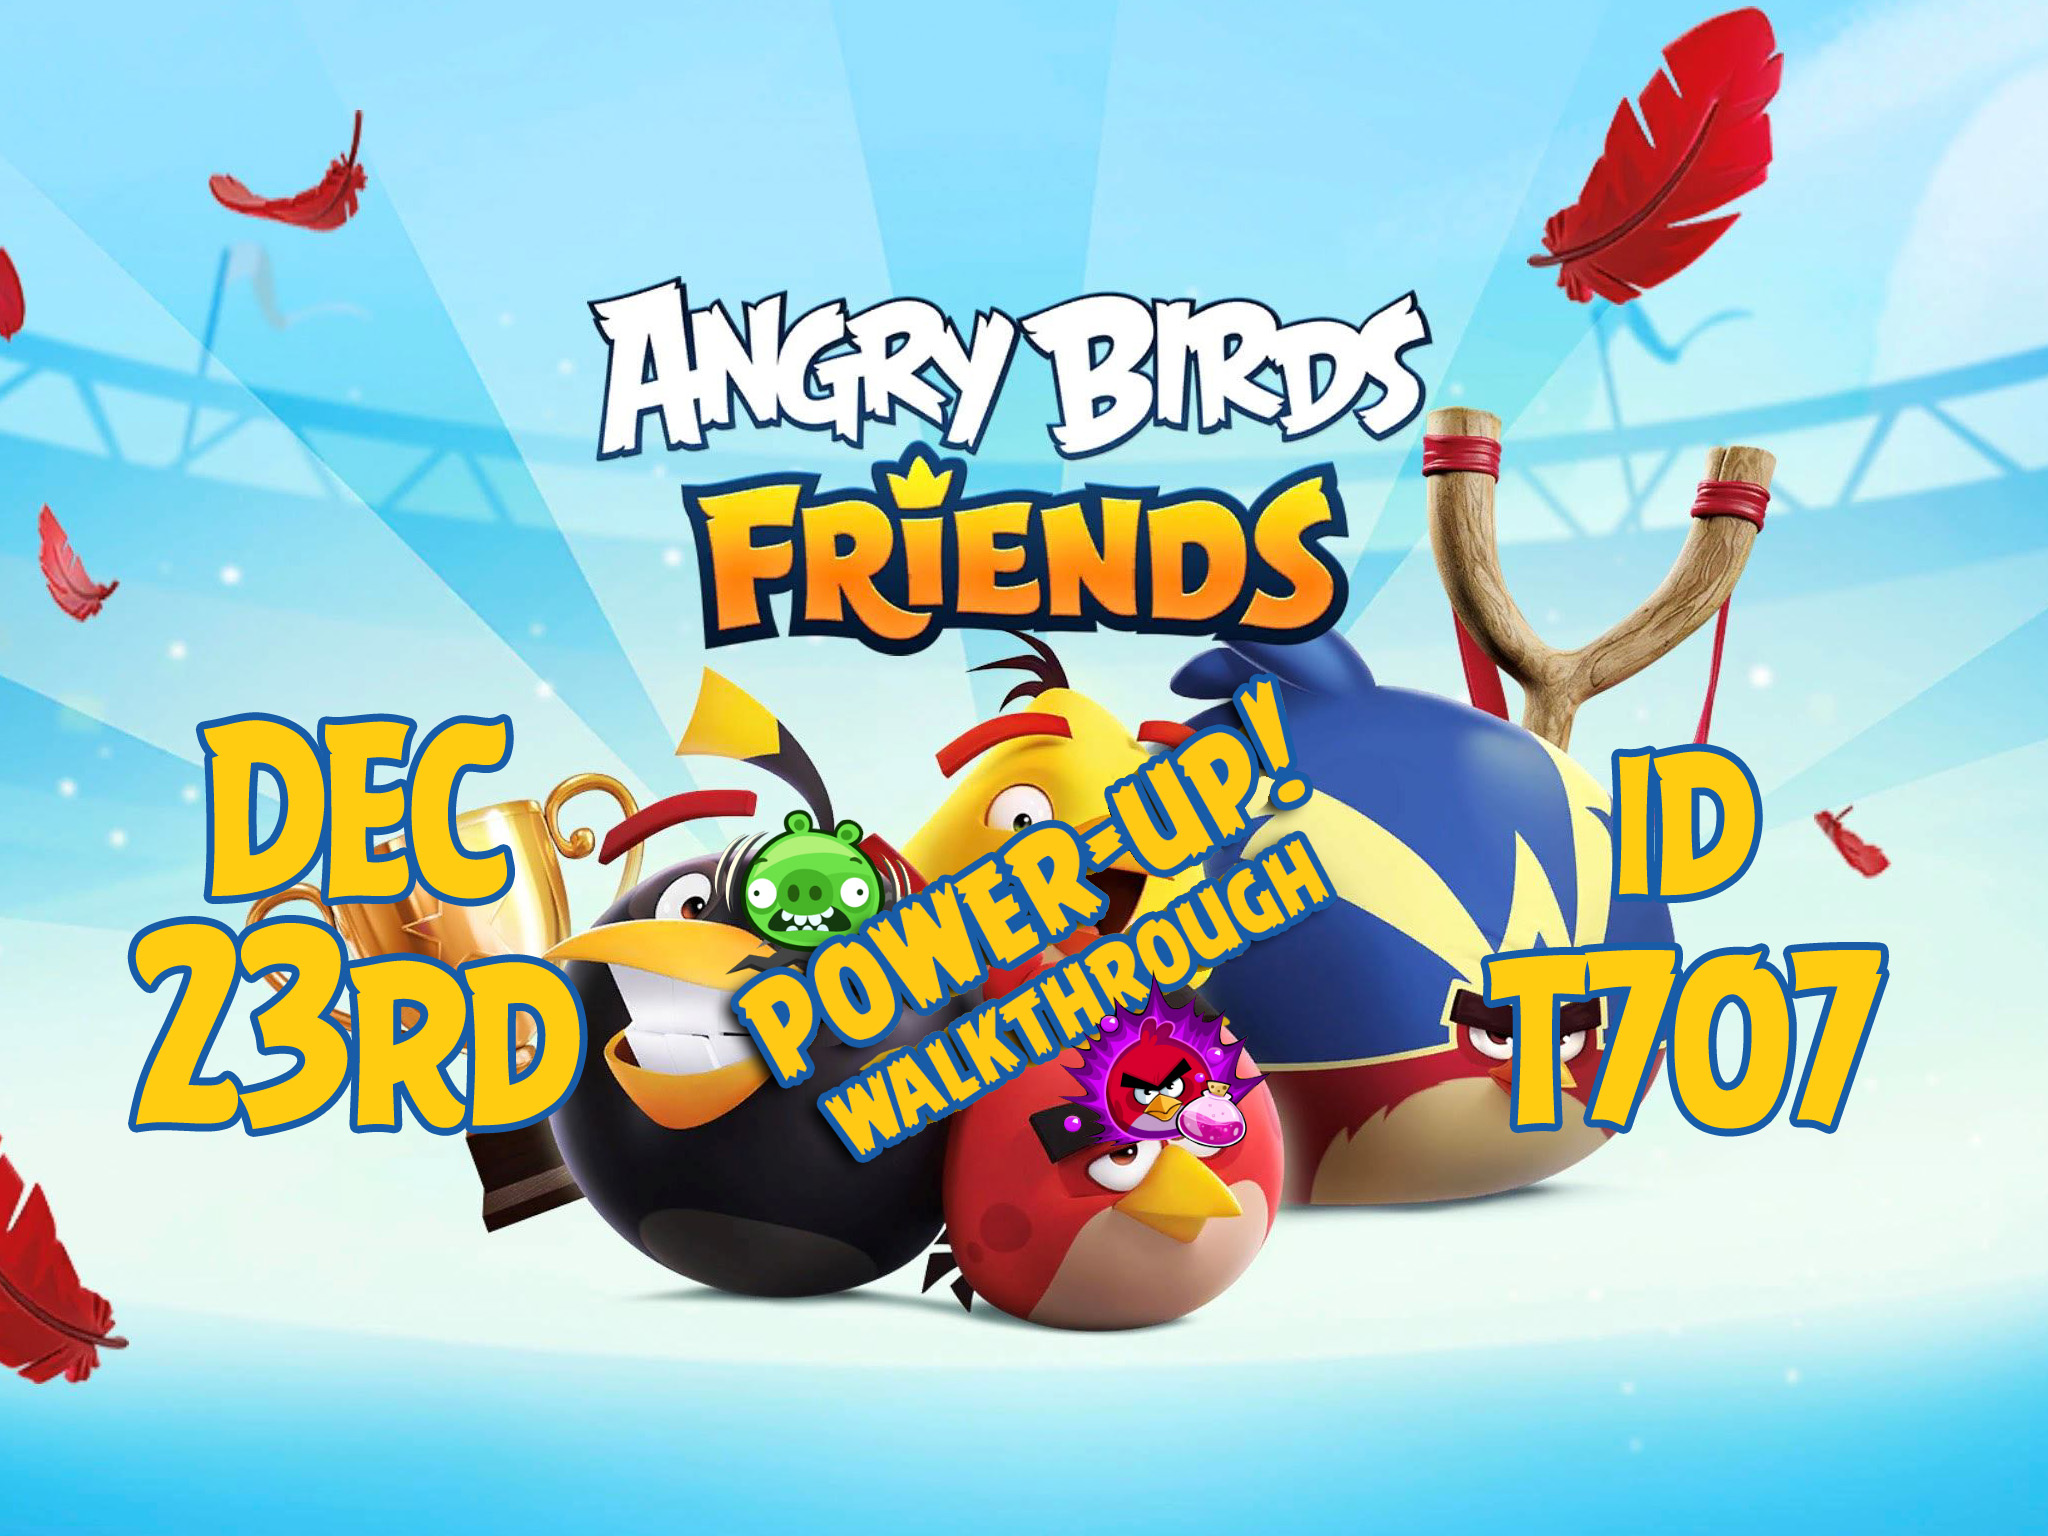 Angry-Birds-Friends-Tournament-T707-Feature-Image-PU